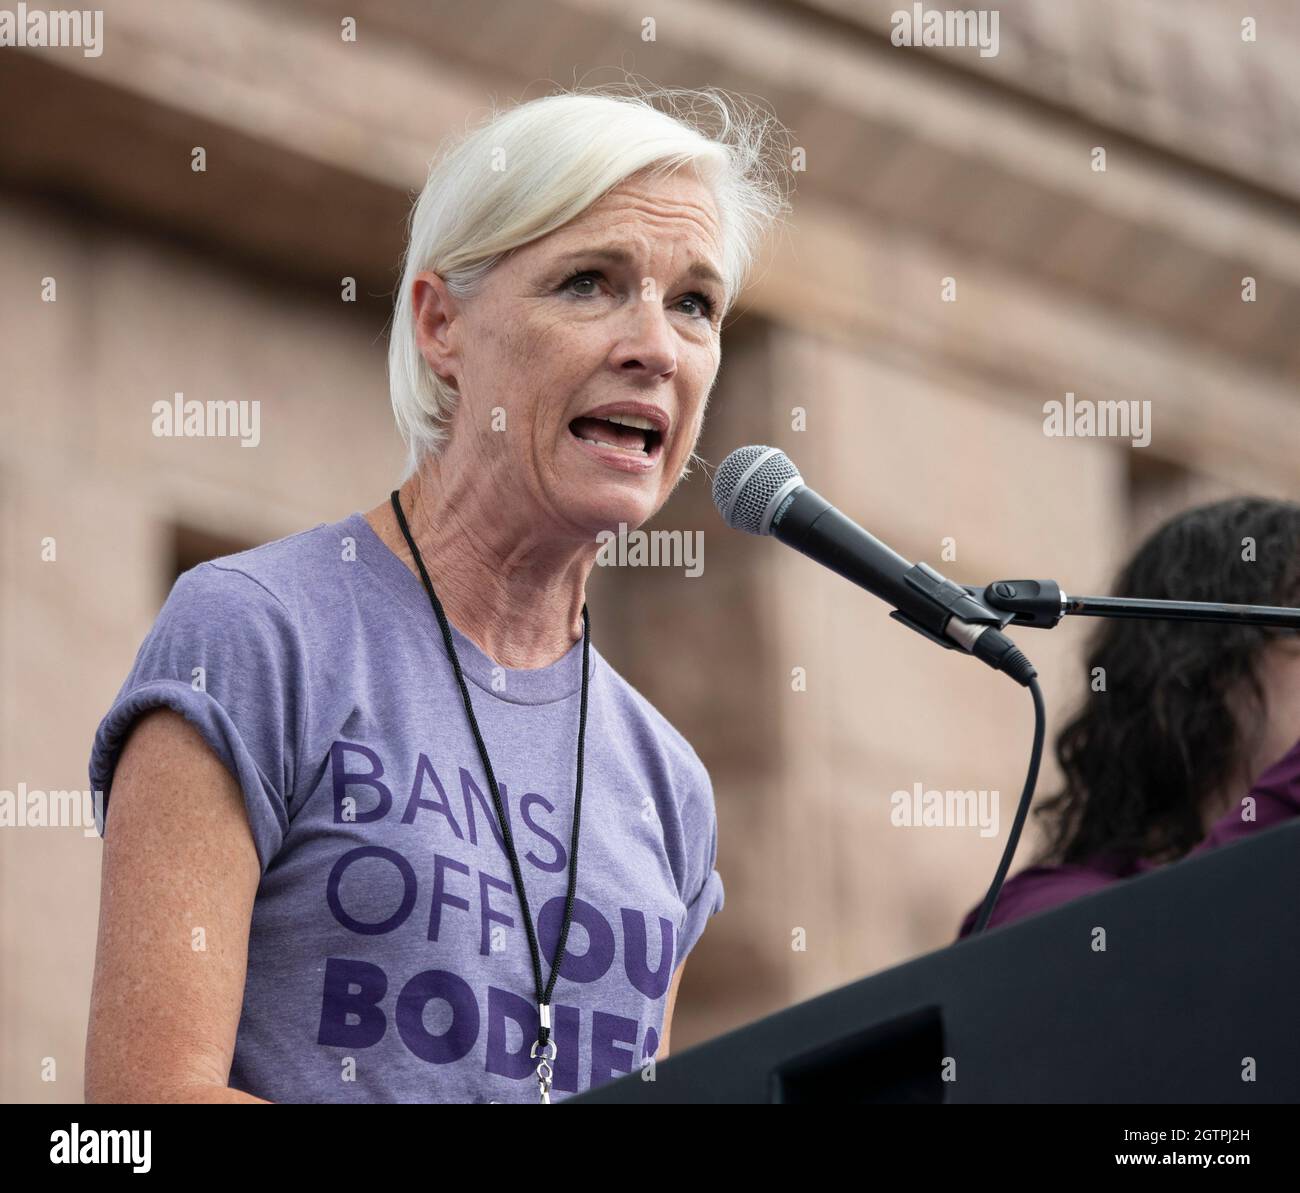 Austin Texas USA, Oct. 2 2021: Former director of Planned parenthood, CECILE RICHARDS, wraps up the rally as several thousand Texas women rally at the Capitol south steps to protest recent Texas laws passed restricting women's right to abortion. A restrictive Texas abortion law makes it a crime to have an abortion after six weeks in most cases. Credit: Bob Daemmrich/Alamy Live News Stock Photo